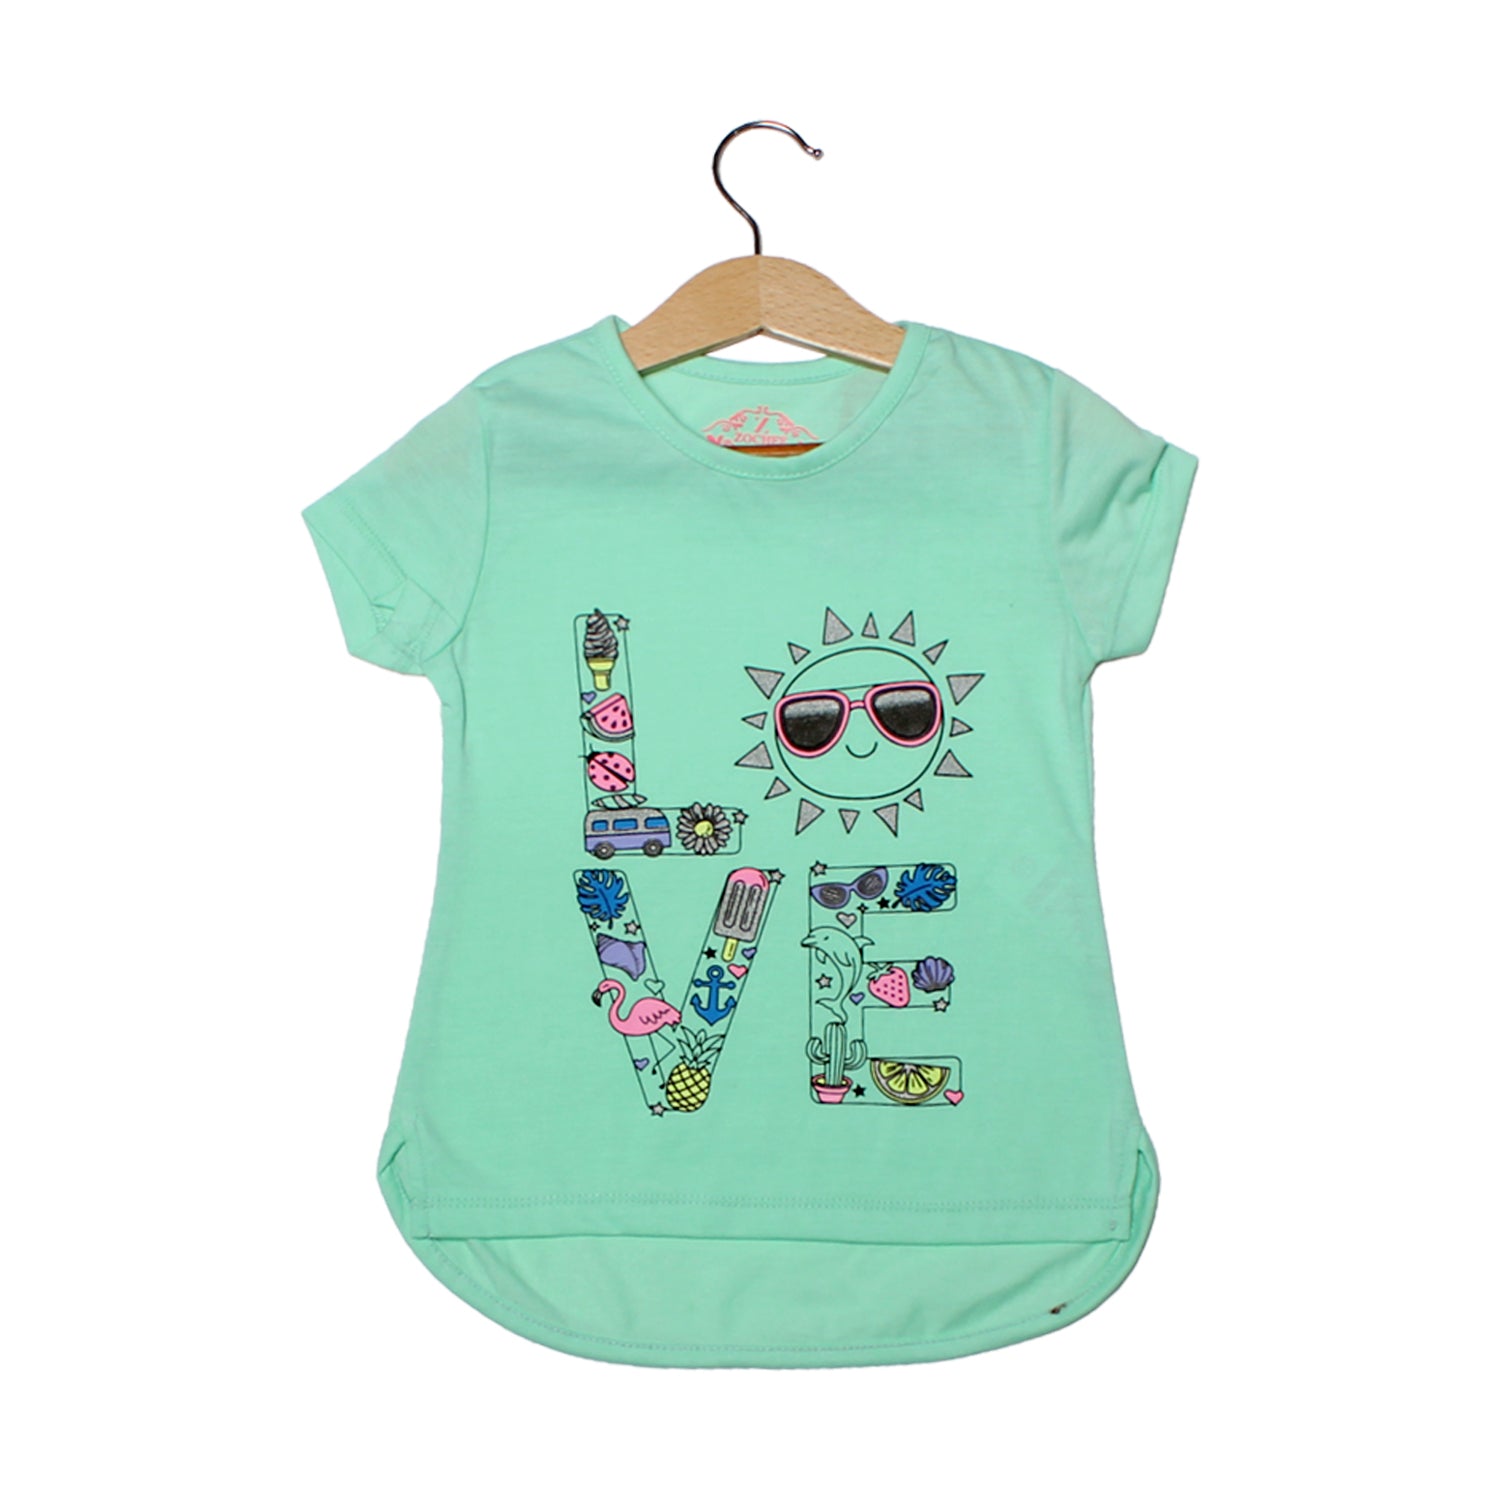 NEW SEA GREEN LOVE PRINTED T-SHIRT TOP FOR GIRLS